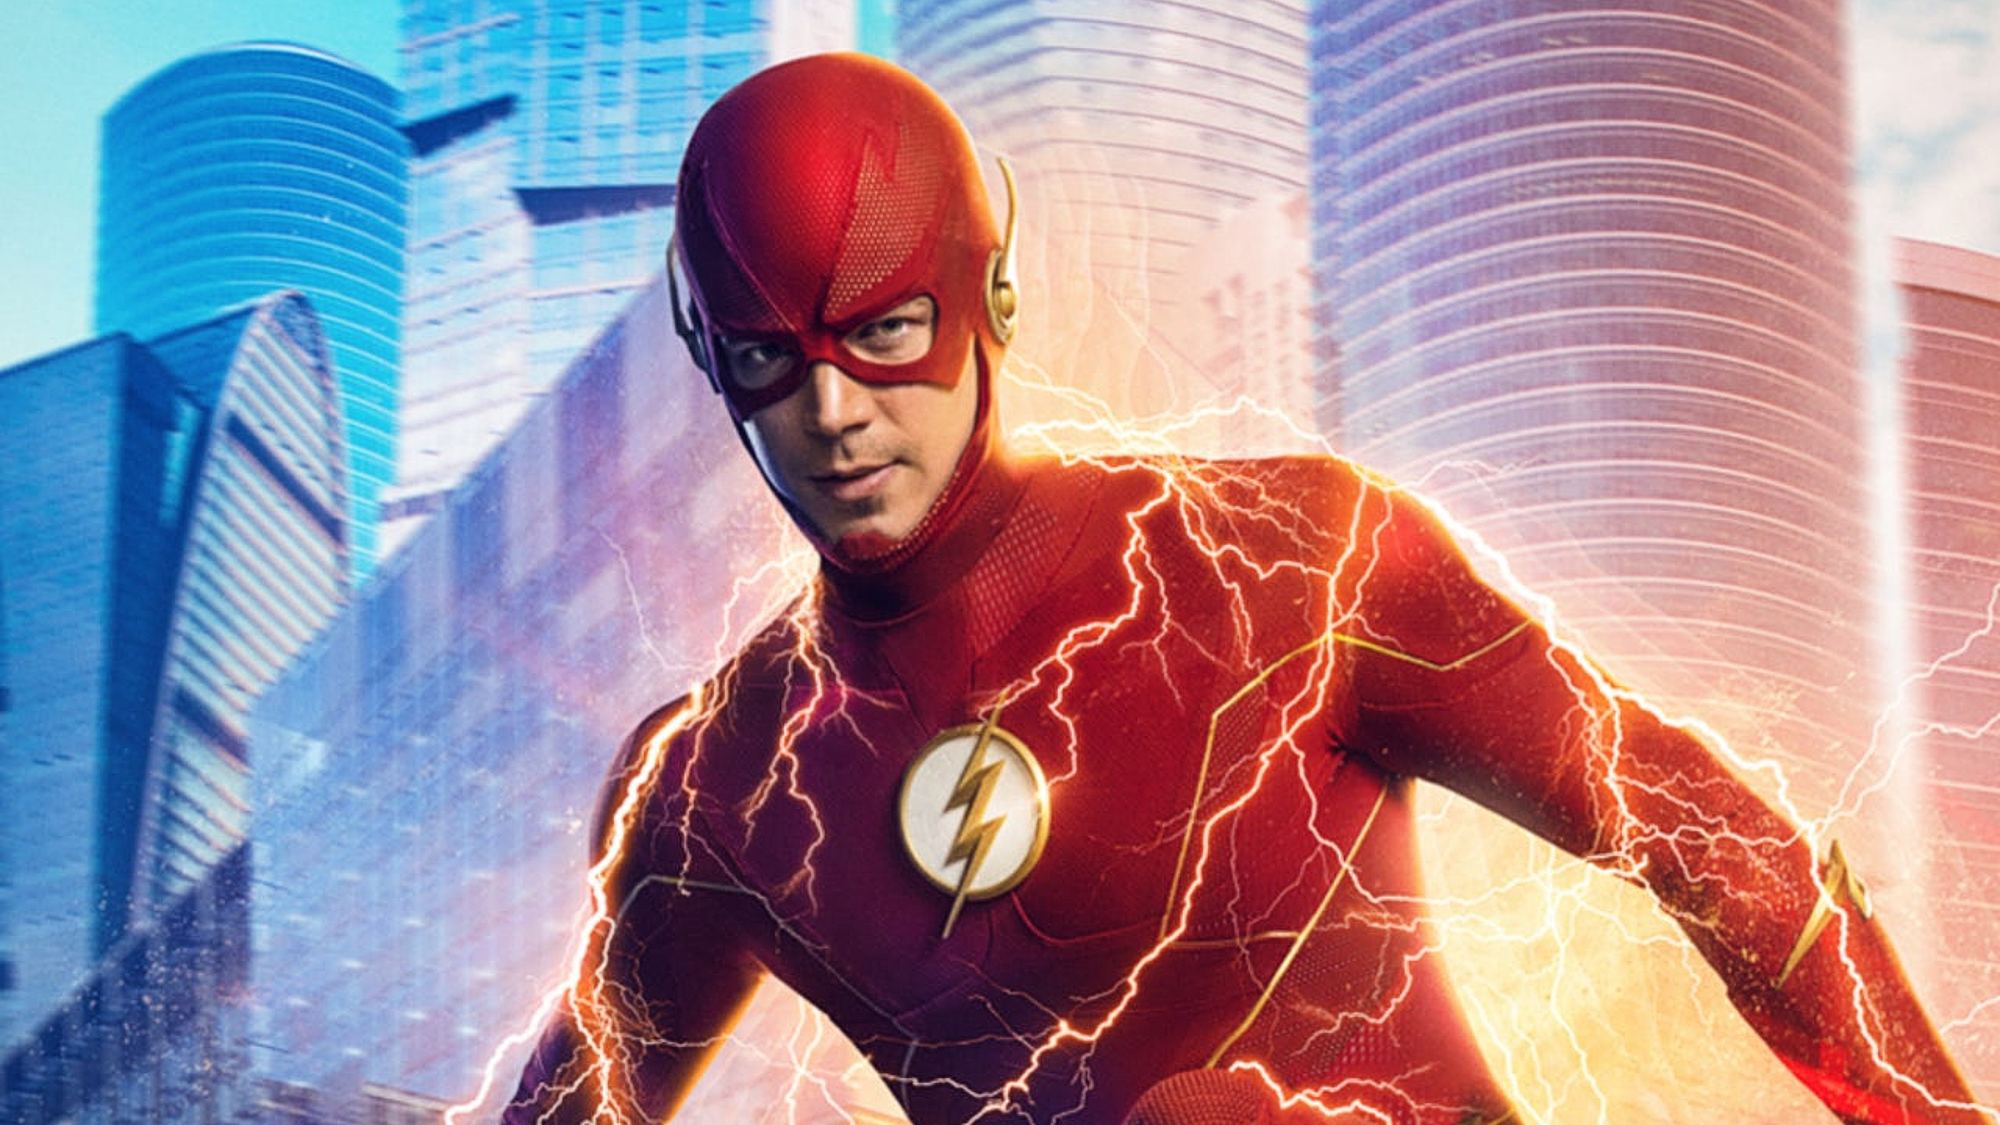 The Flash Season 9 is the end | Shows like The flash | The Flash season 10 is not happening